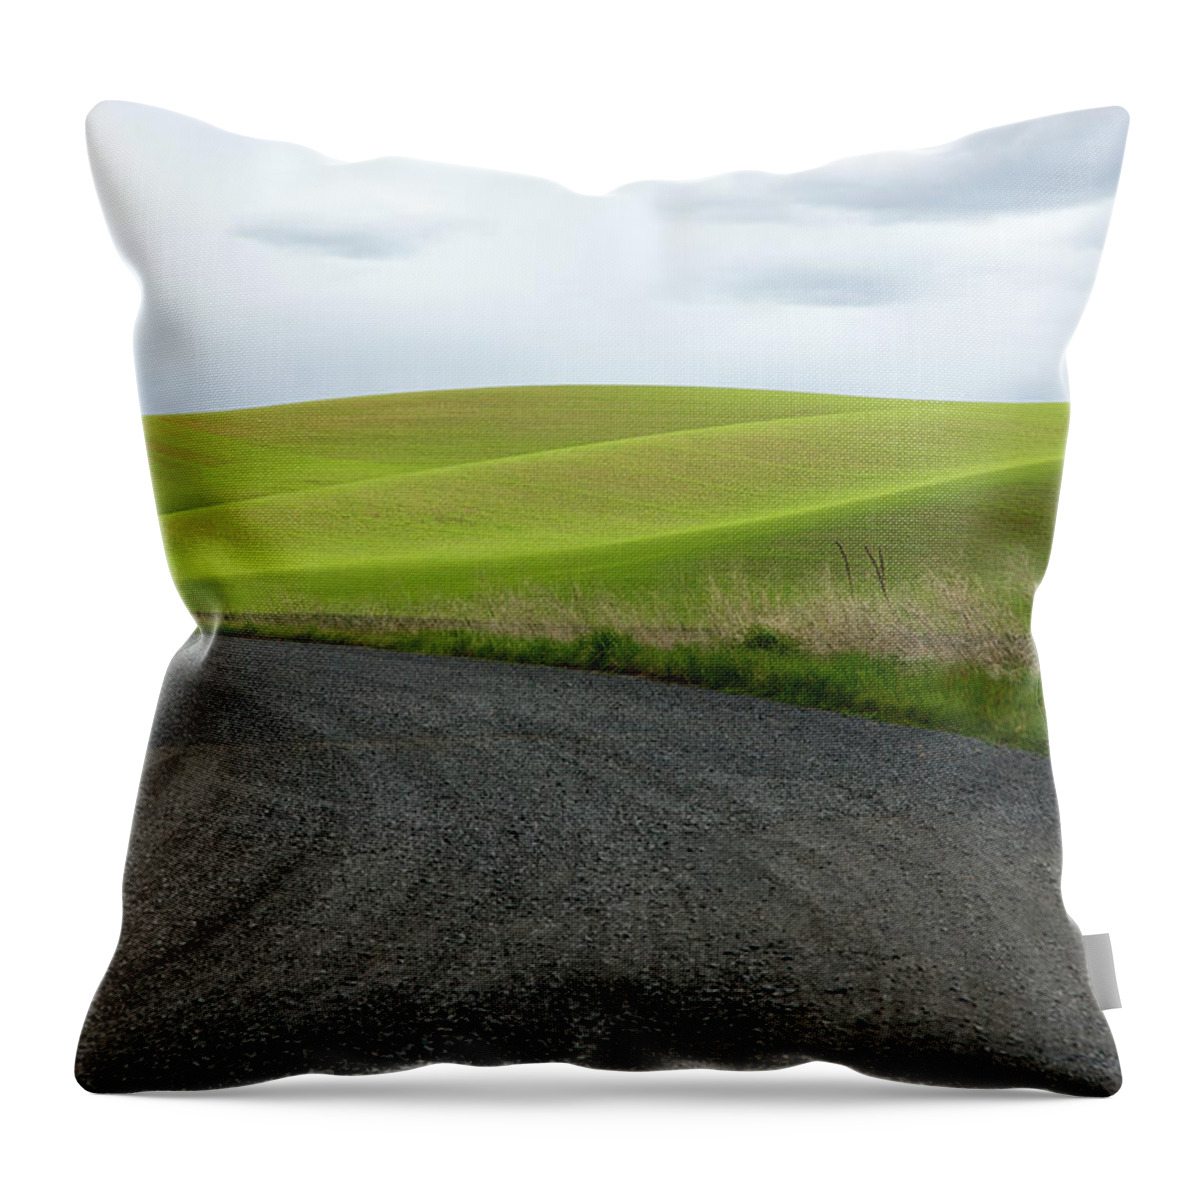 Palouse Throw Pillow featuring the photograph Curves Ahead by Mary Lee Dereske